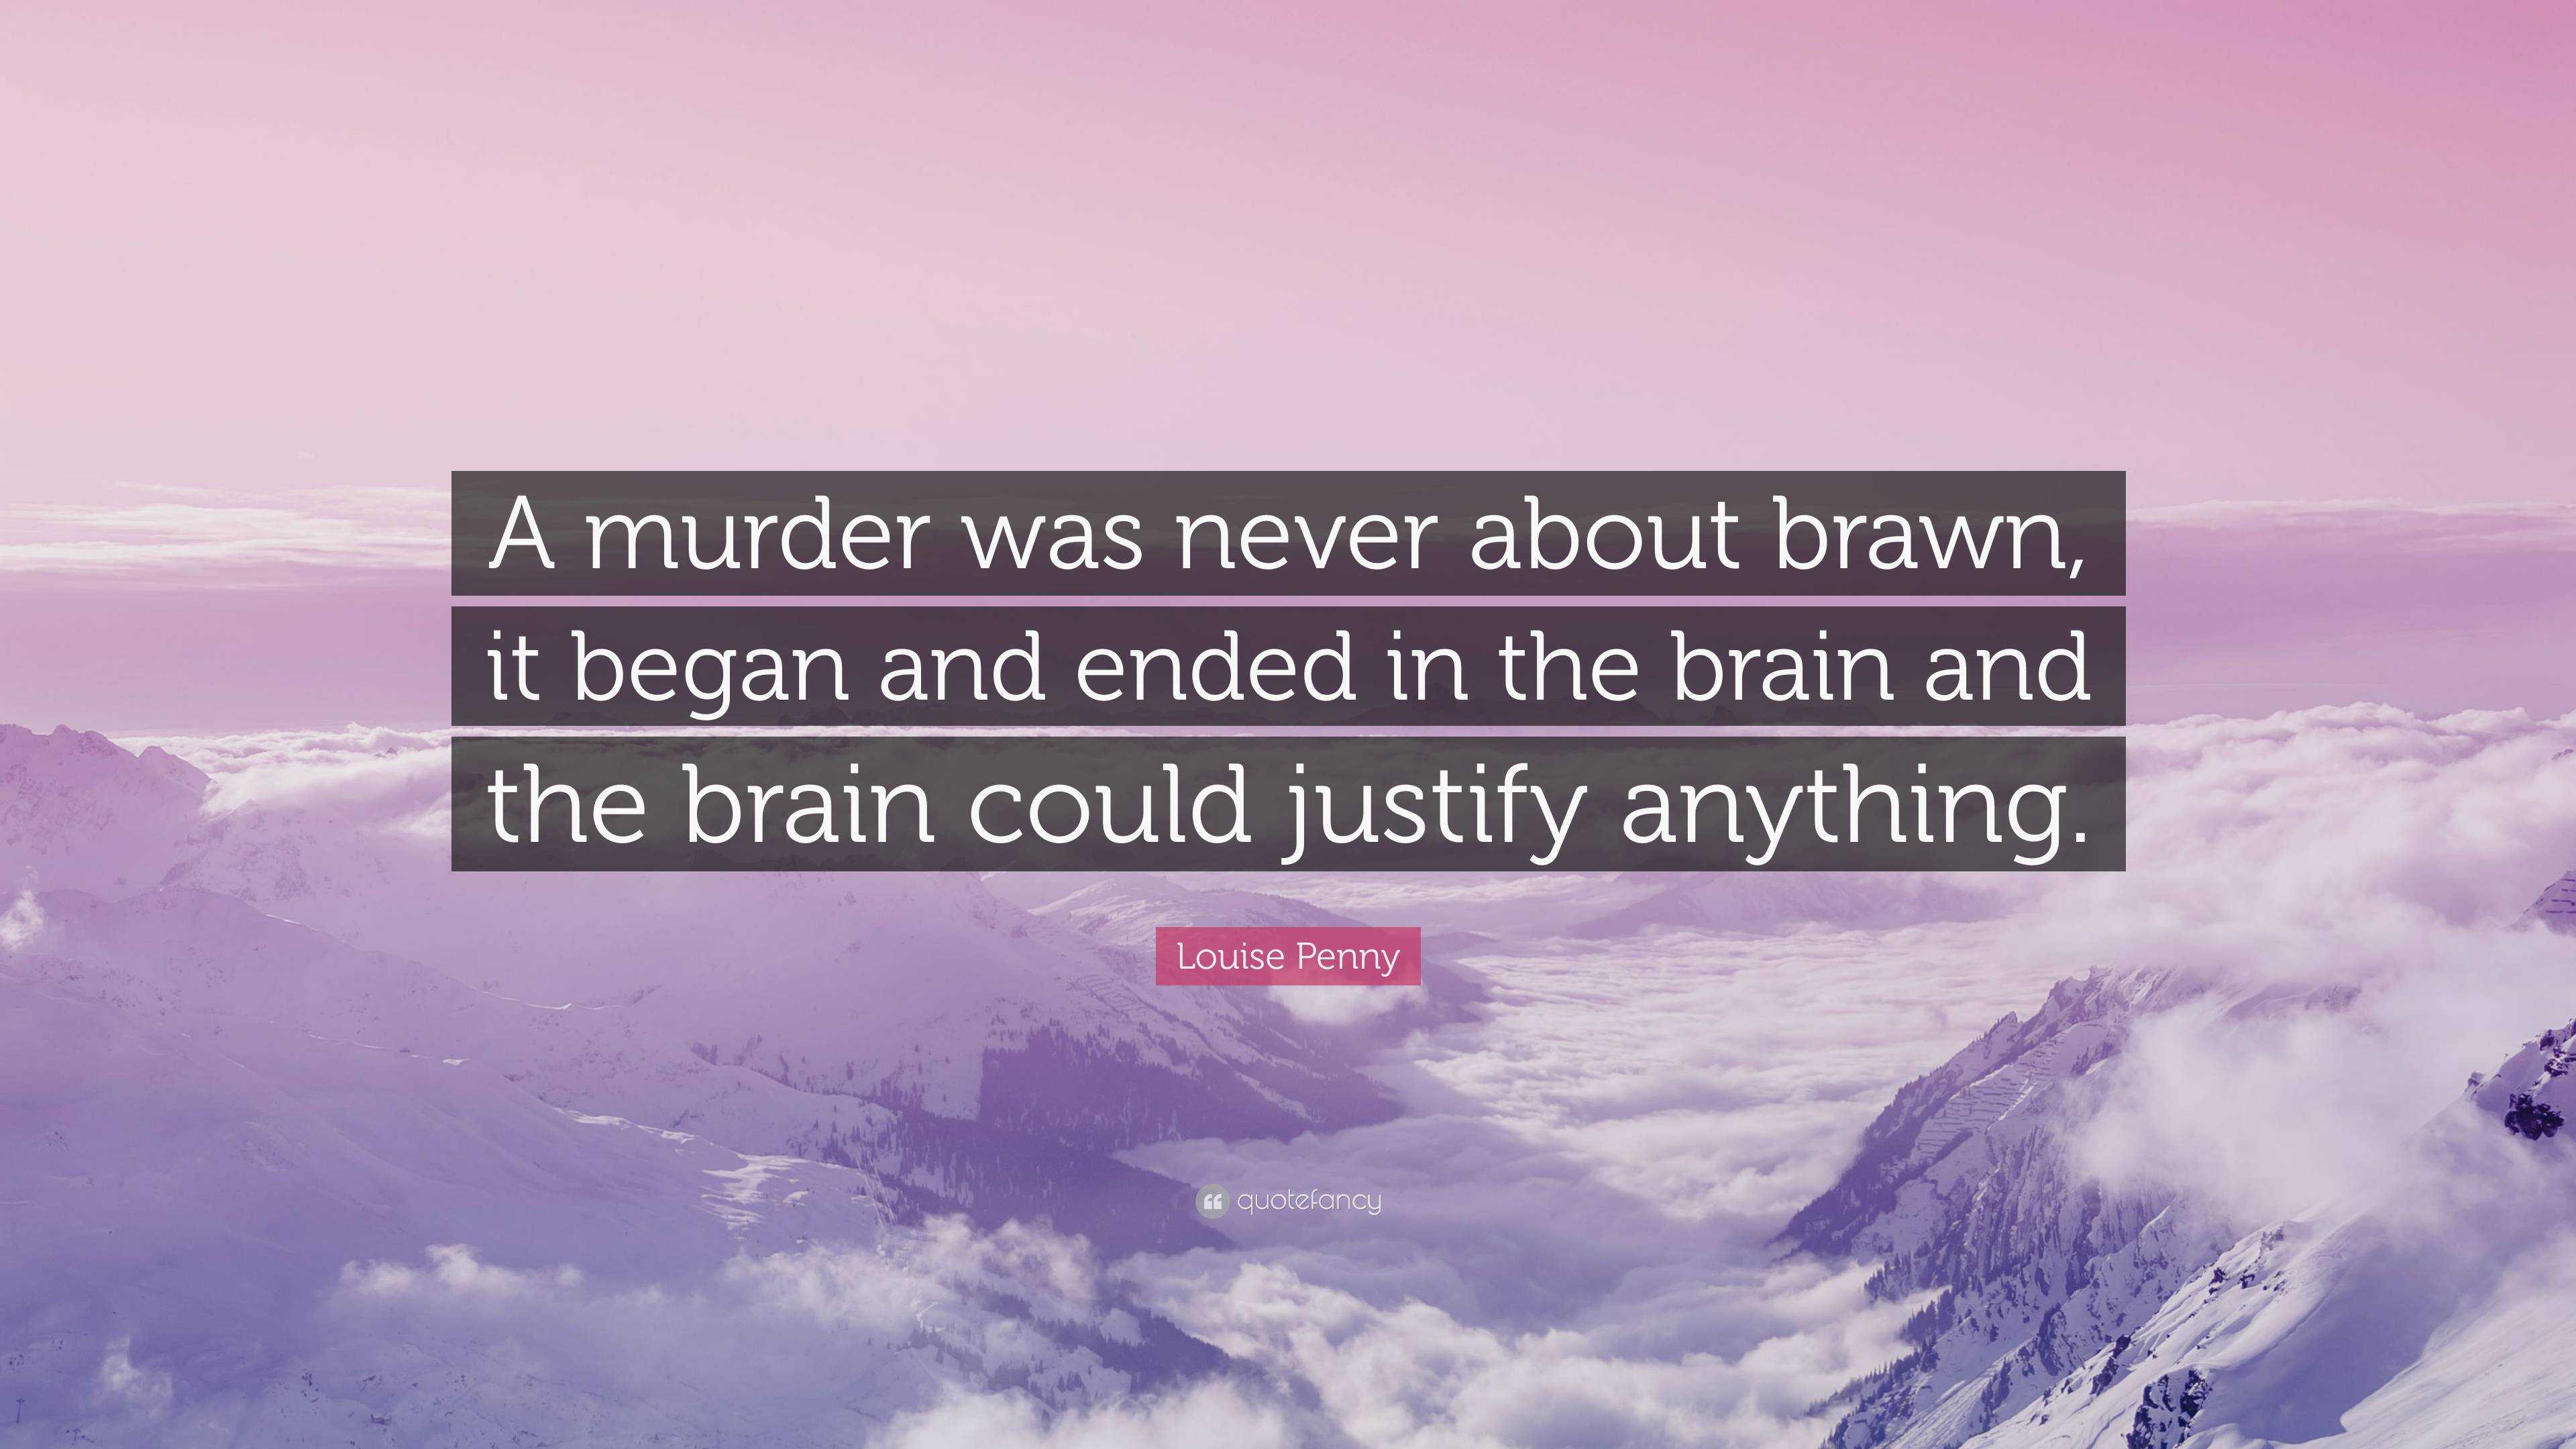 Louise Penny Quote: “A murder was never about brawn, it began and ended ...